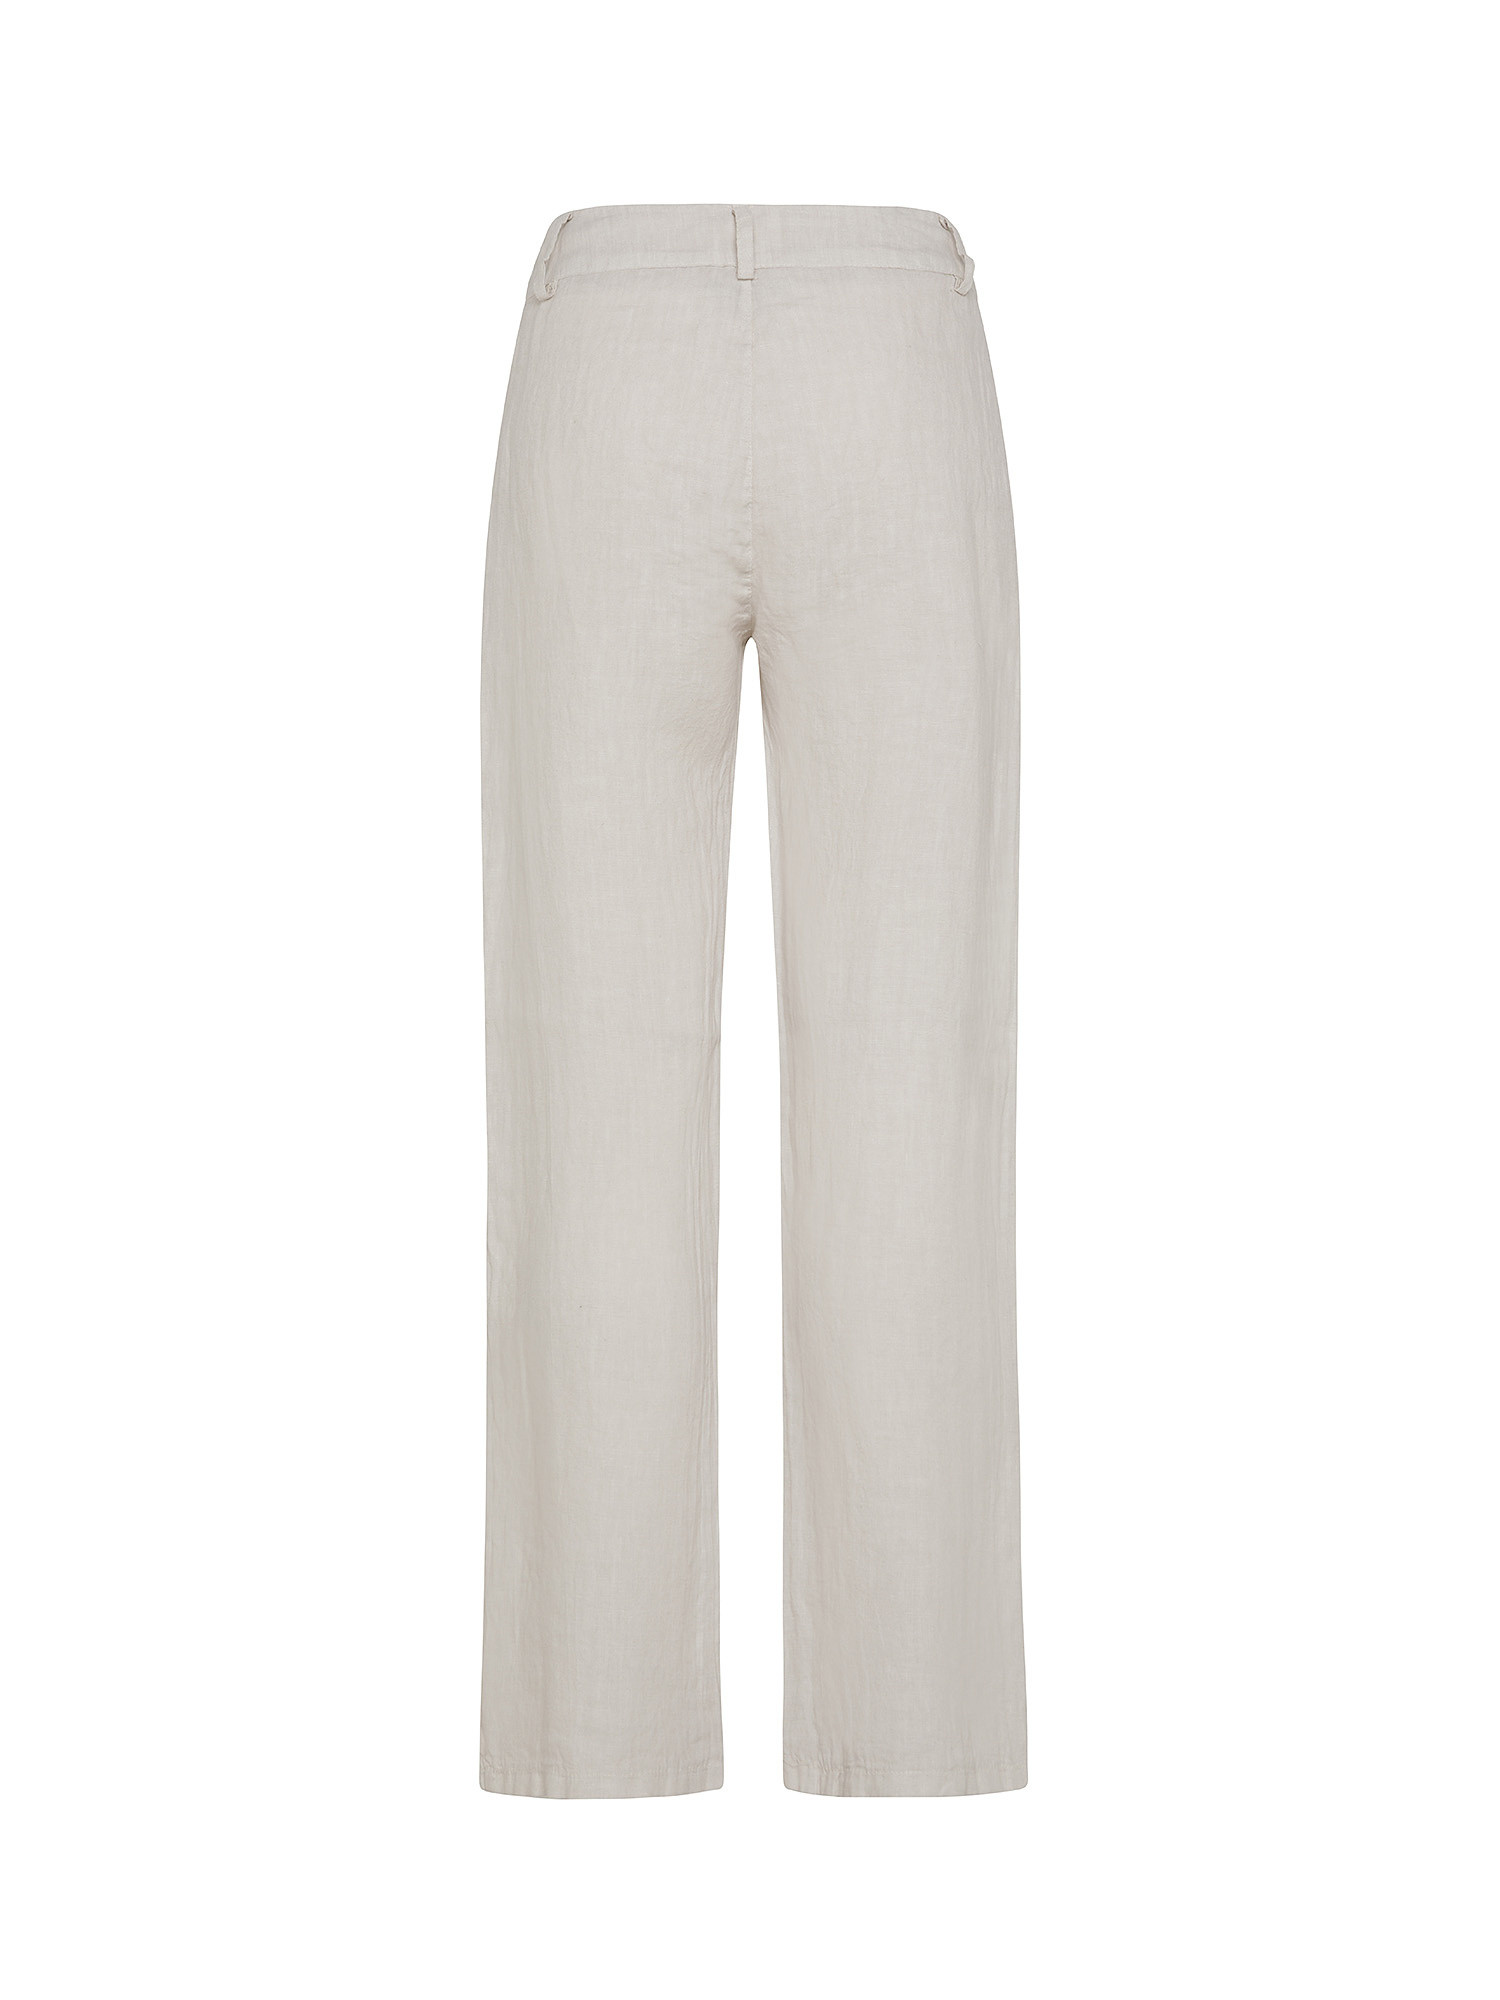 Koan - Linen trousers with pleats, Beige, large image number 1